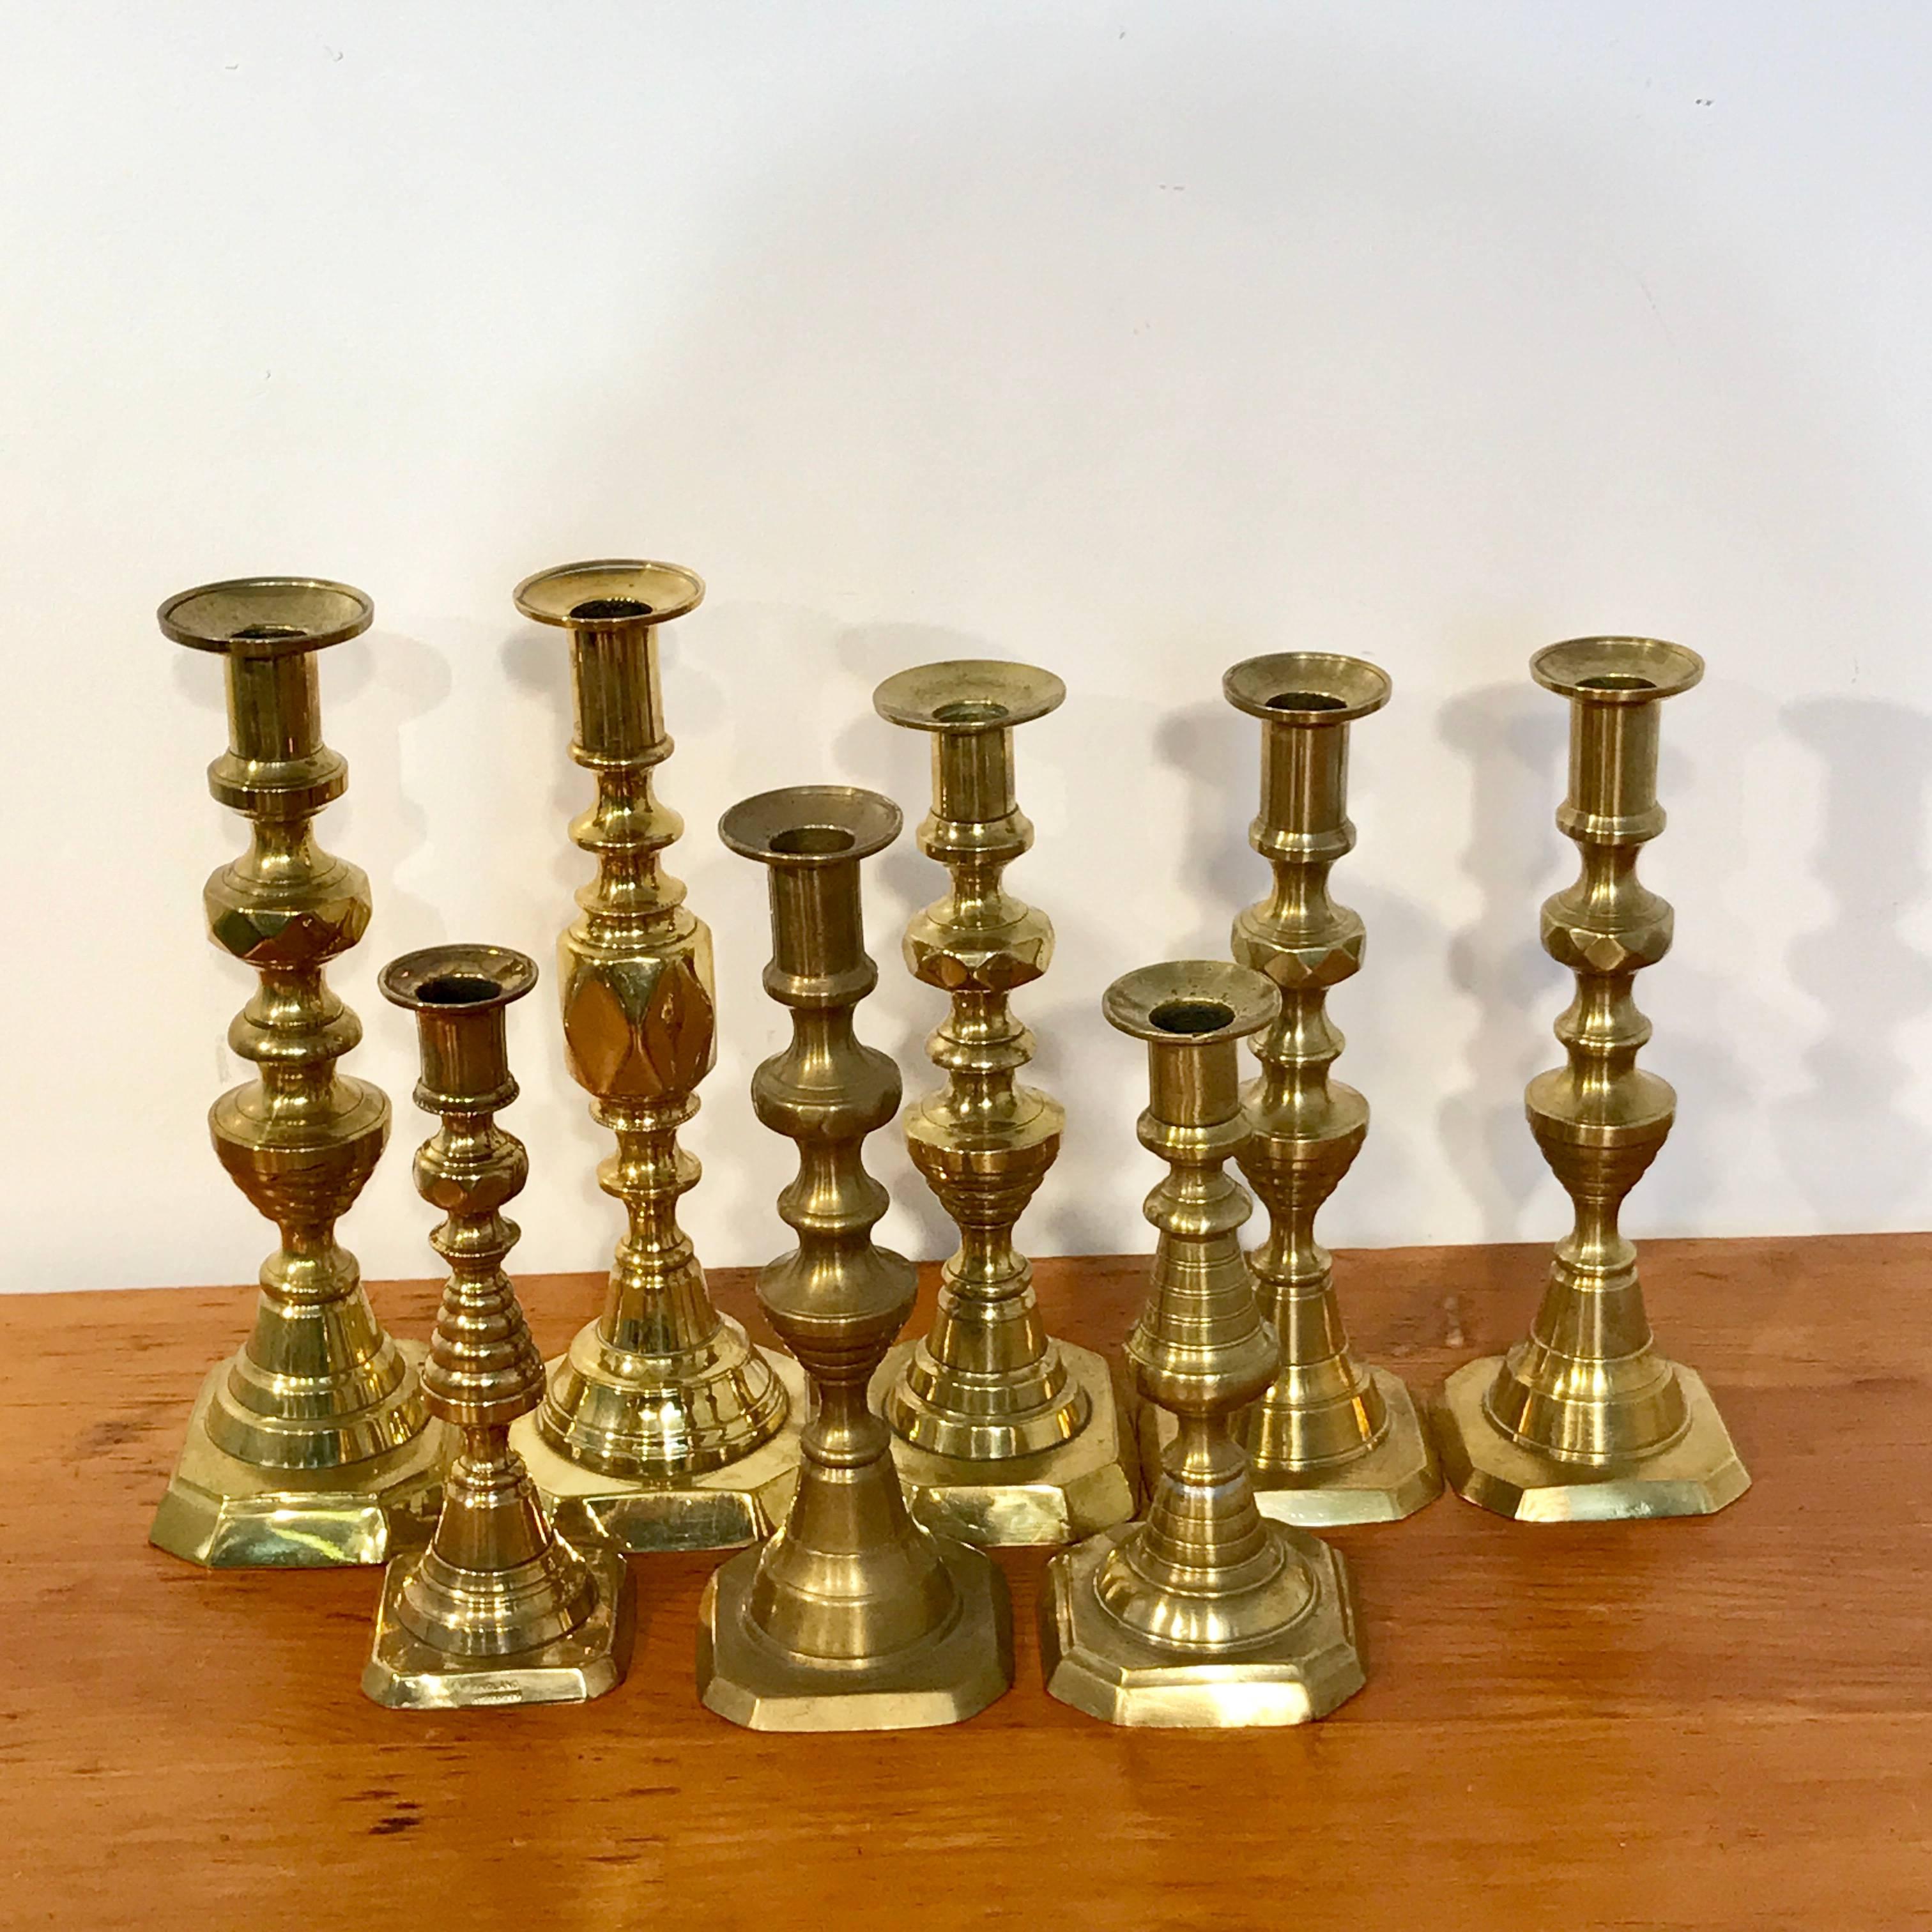 A collection of eight antique English brass candlesticks, varying heights from 11